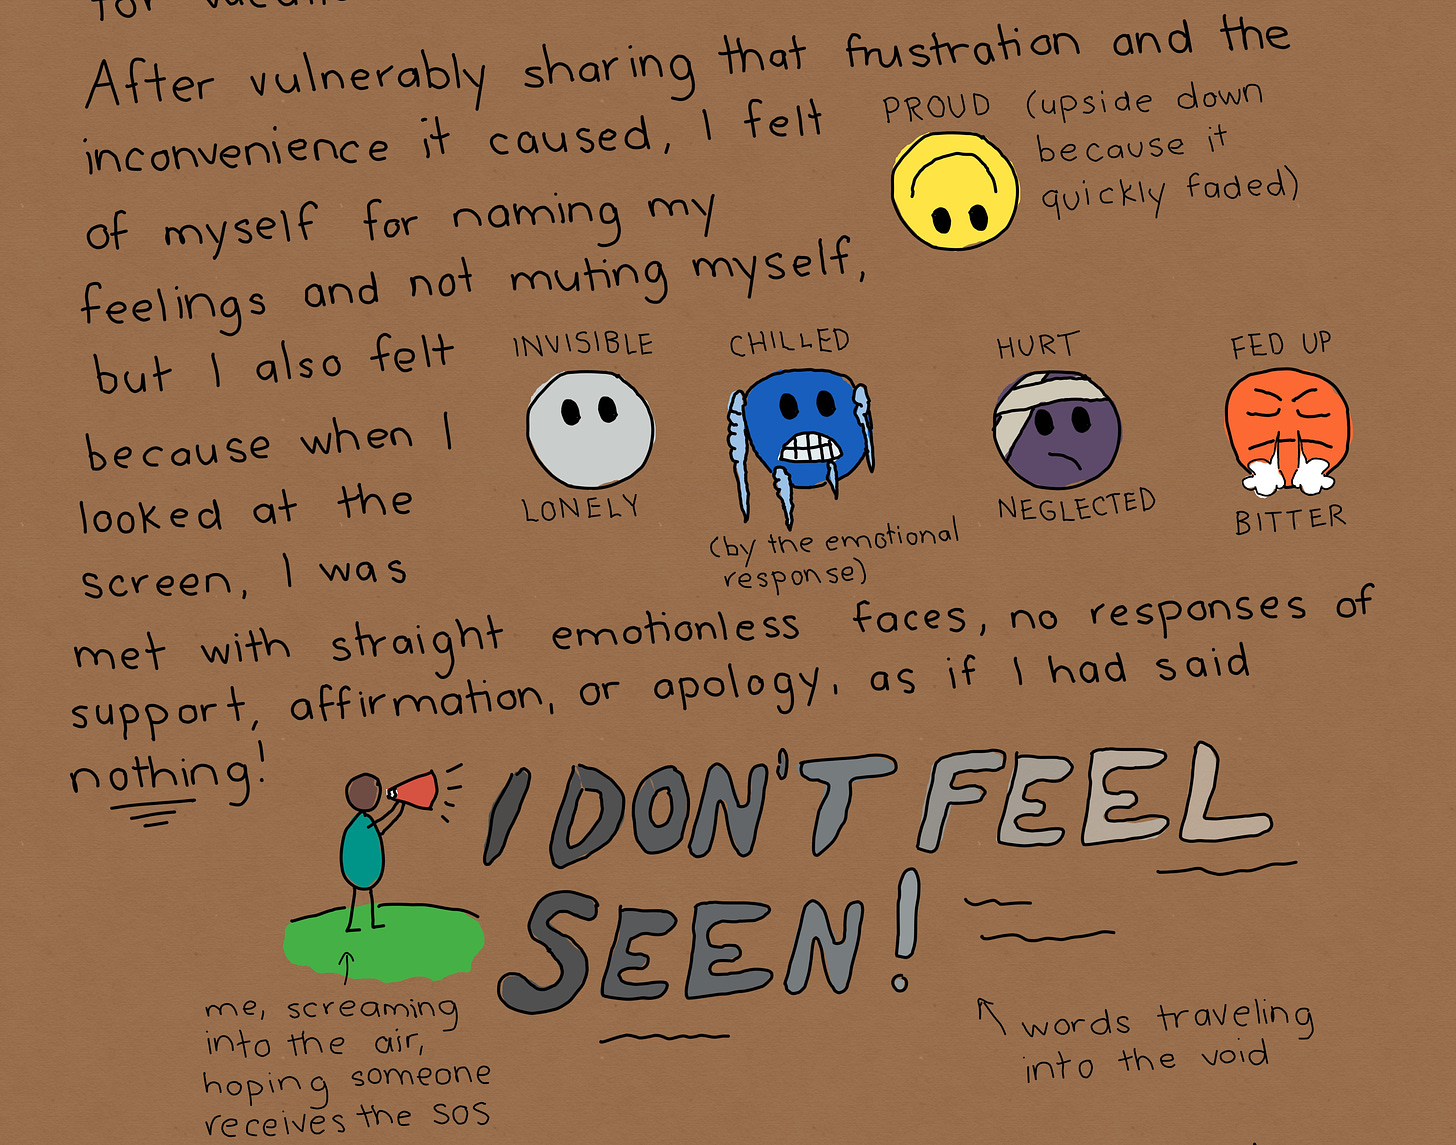 This is a digital drawing. The text reads, "After vulnerably sharing that frustation and the inconvenience if caused, I felt proud (picture of an upside down smiling emoji) of myself for naming my feelings and not muting myself, but I also felt invisible, lonely, chilled by the emotional response, hurt, neglected, fed up, and bitter (there are pictures of emojis depicting these clusters of emotions) because when I looked at the screen, I was met with straight emotionless faces, no responses of support, affirmation, or apology, as if I had said nothing!" Below this text is a picture of a person standing on a piece of land yelling into a megaphone. Bubble letters float in the sky and read, "I DON'T FEEL SEEN!" in all caps.